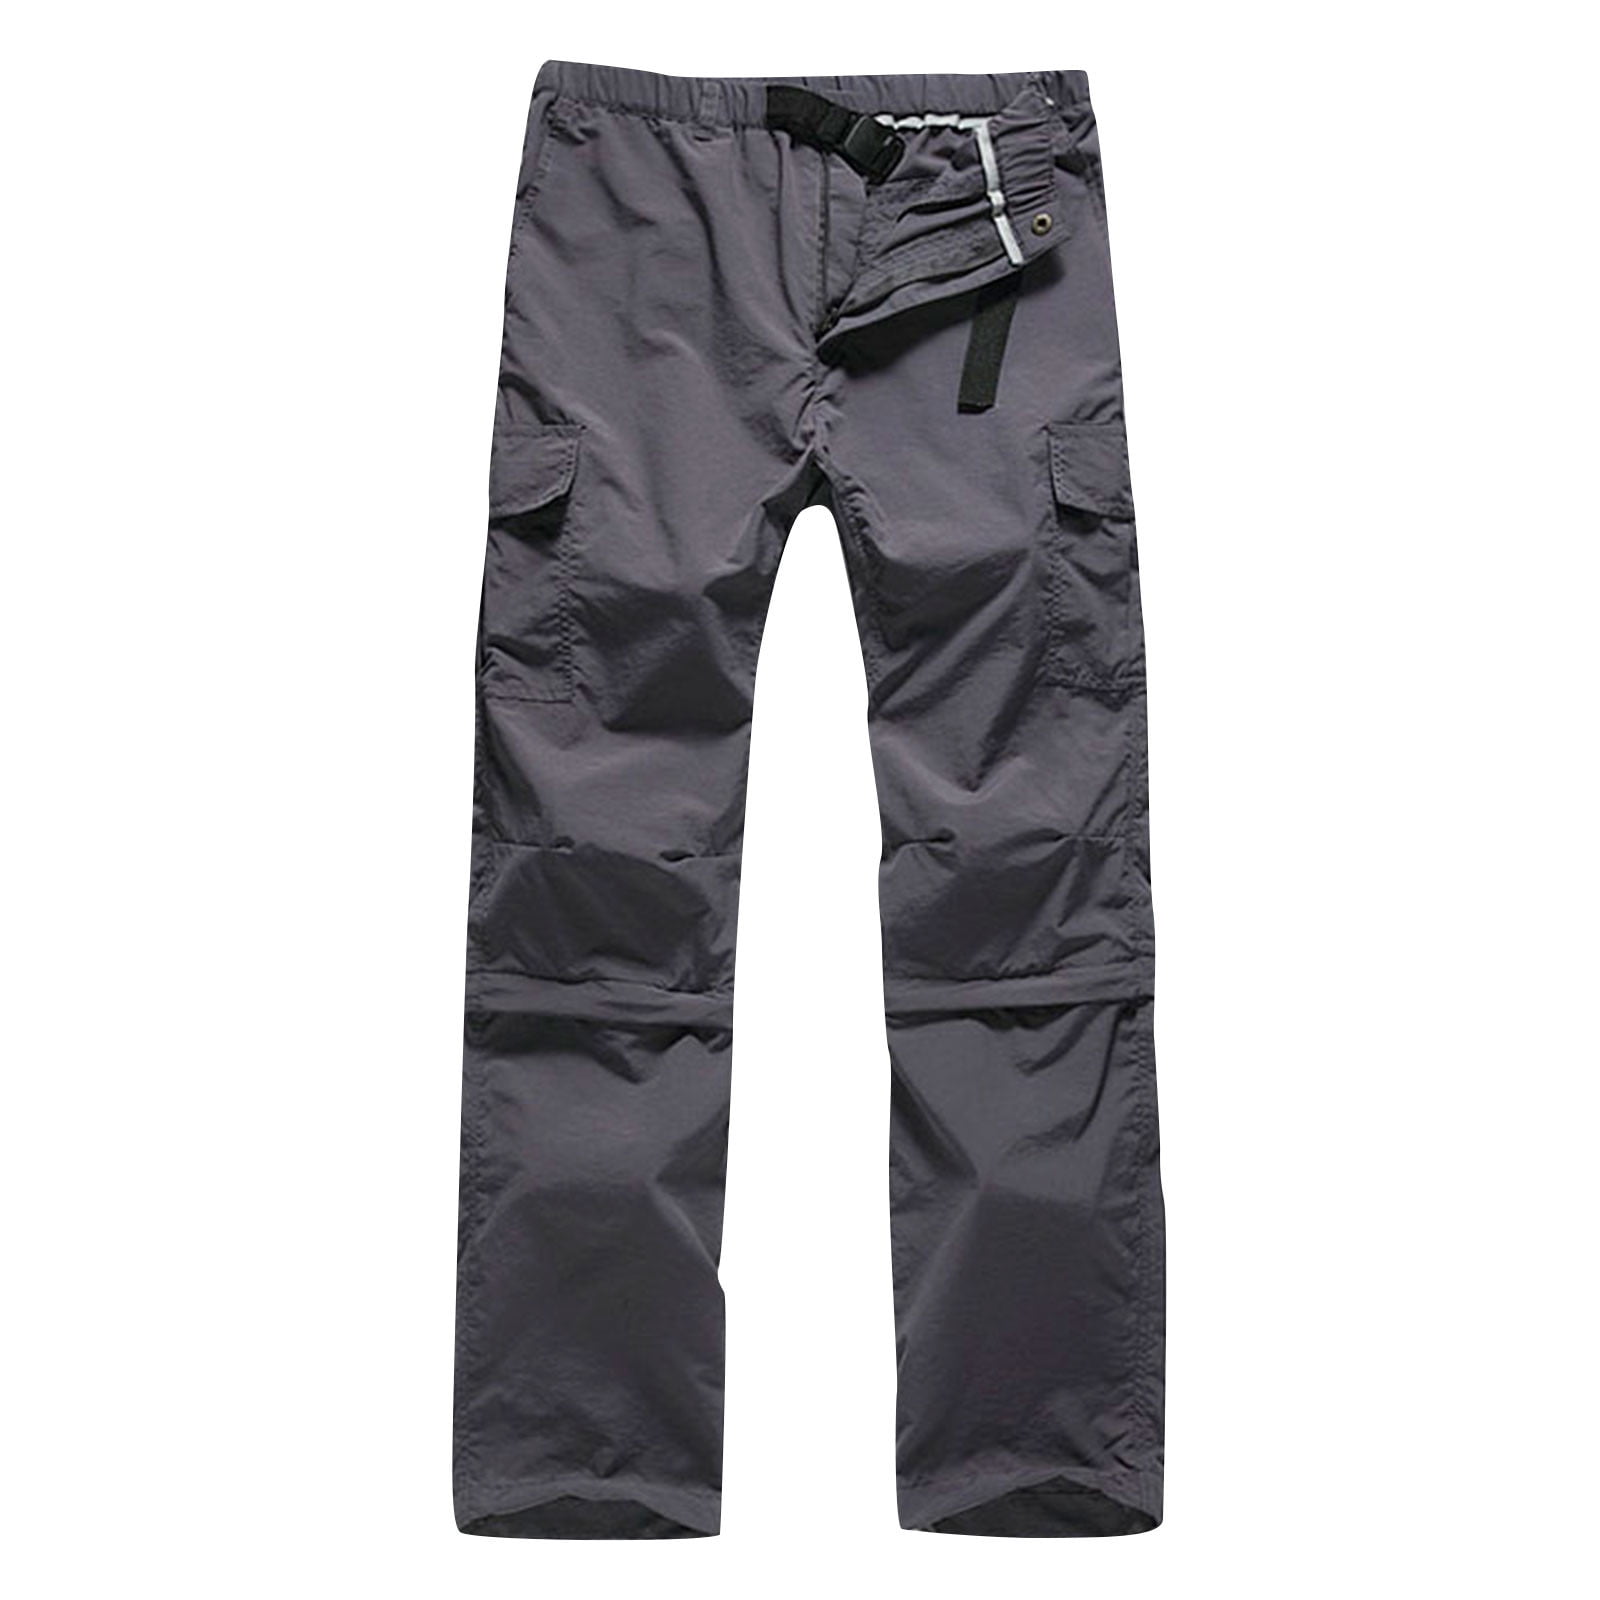 tklpehg Cargo Pants for Men Fashion Long Pants Casual Solid Color Button  Zipper Multiple Pockets Outdoor Straight Type Fitness Pants Cargo Pants